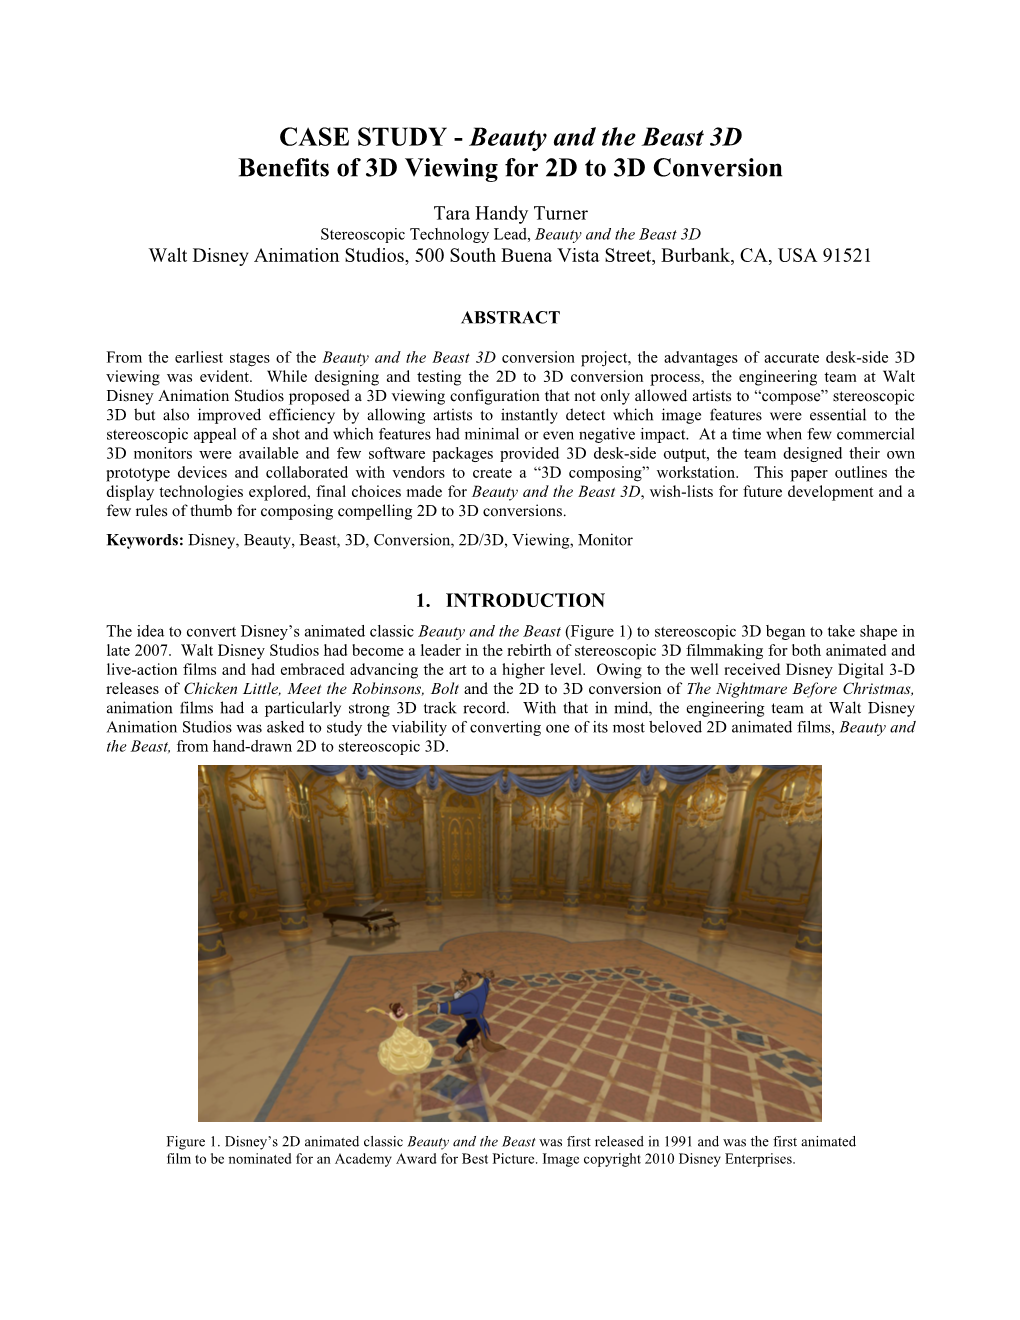 CASE STUDY - Beauty and the Beast 3D Benefits of 3D Viewing for 2D to 3D Conversion